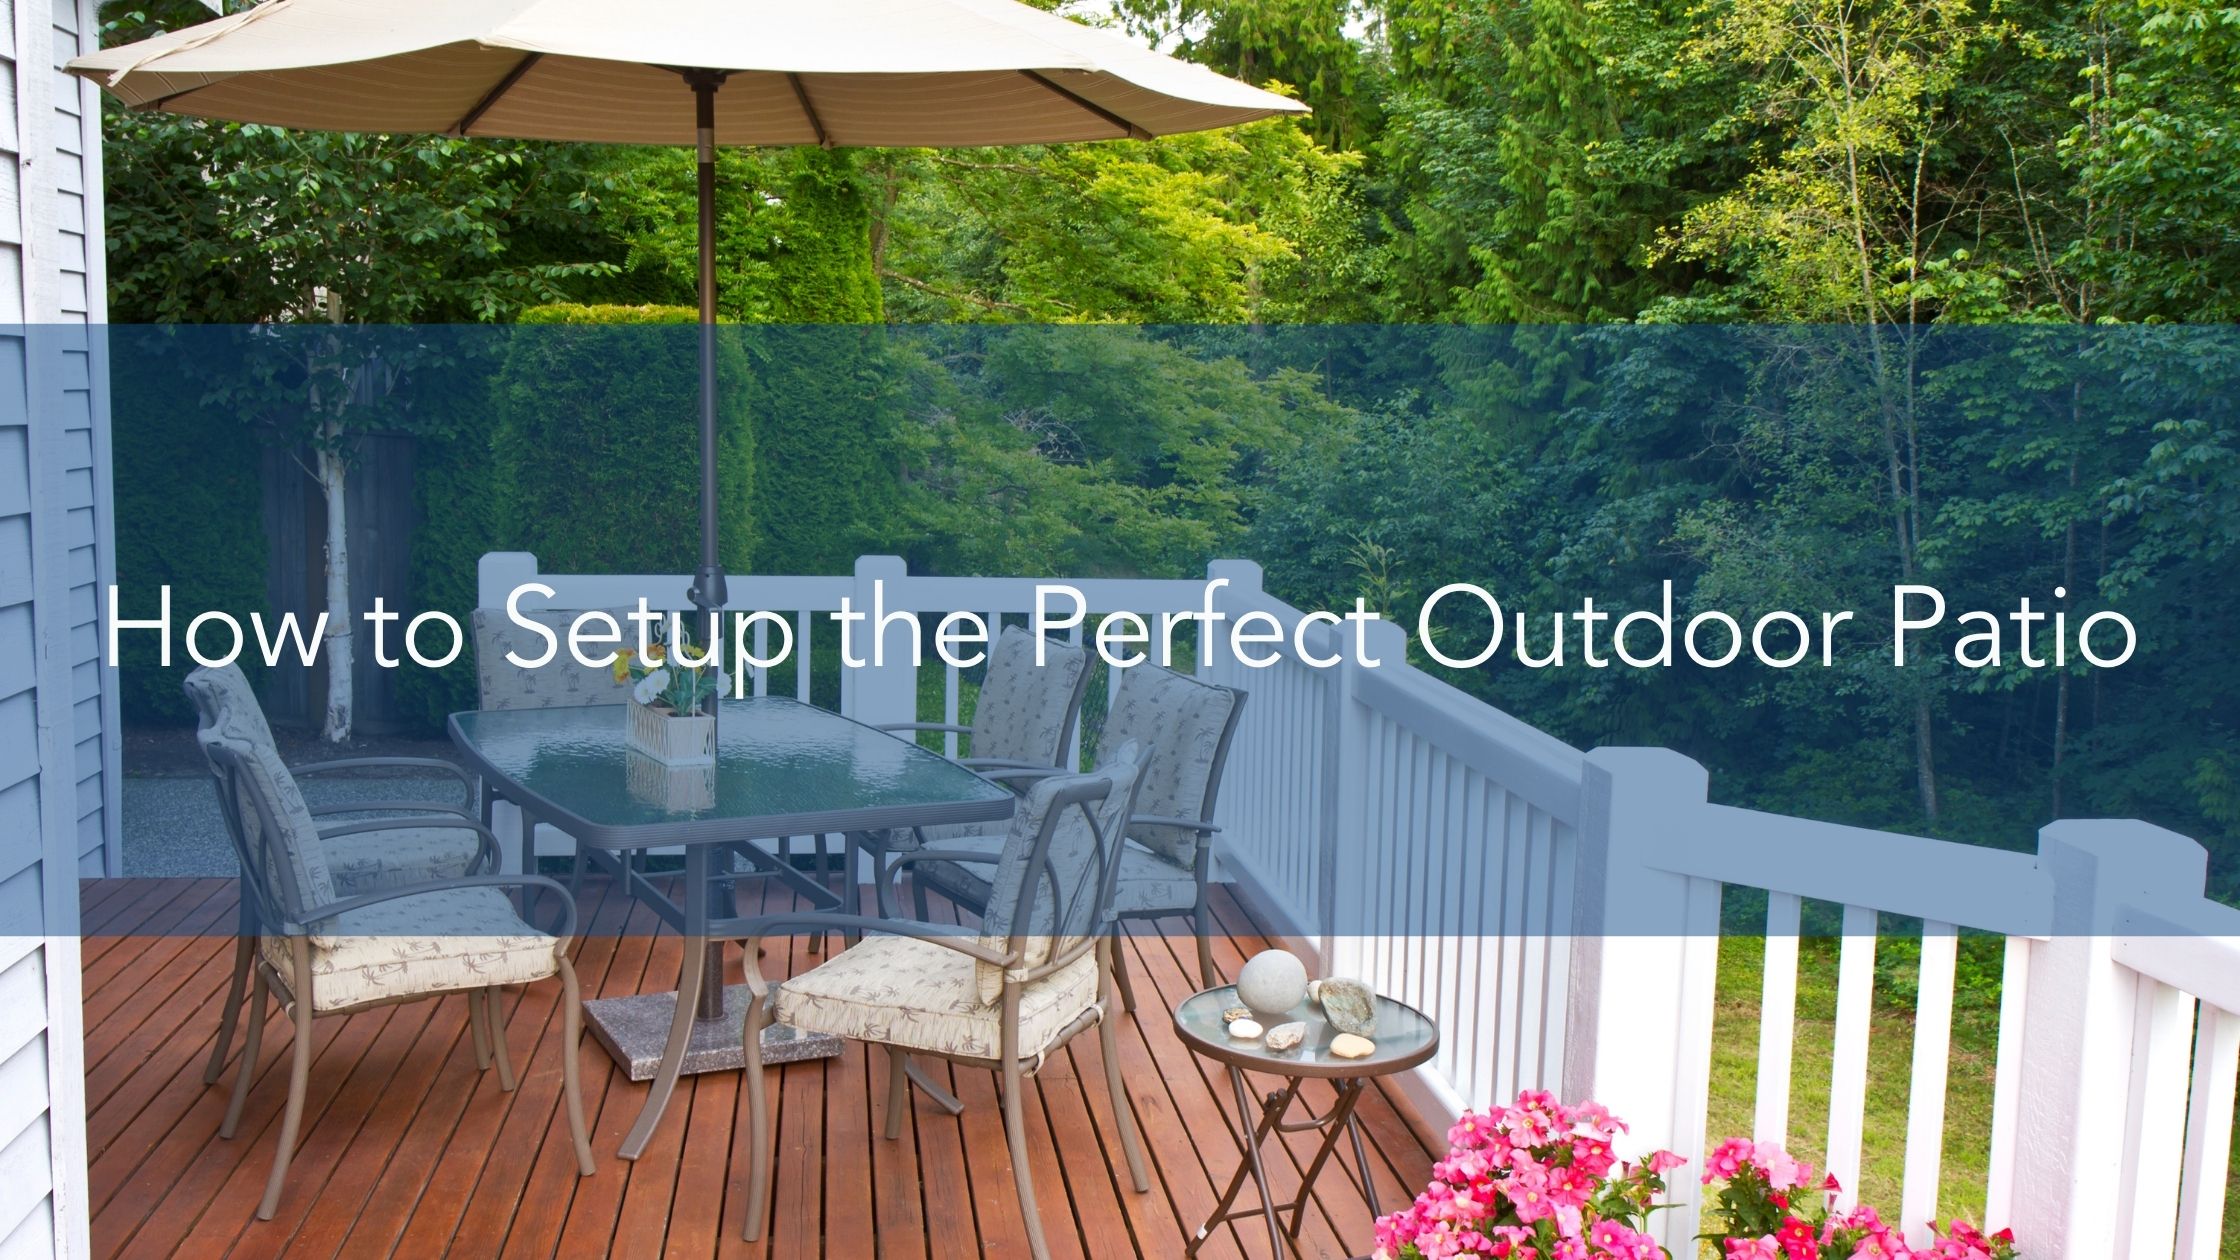 https://www.handymanconnection.net/wp-content/uploads/2022/05/How-to-Setup-the-Perfect-Outdoor-Patio.jpg